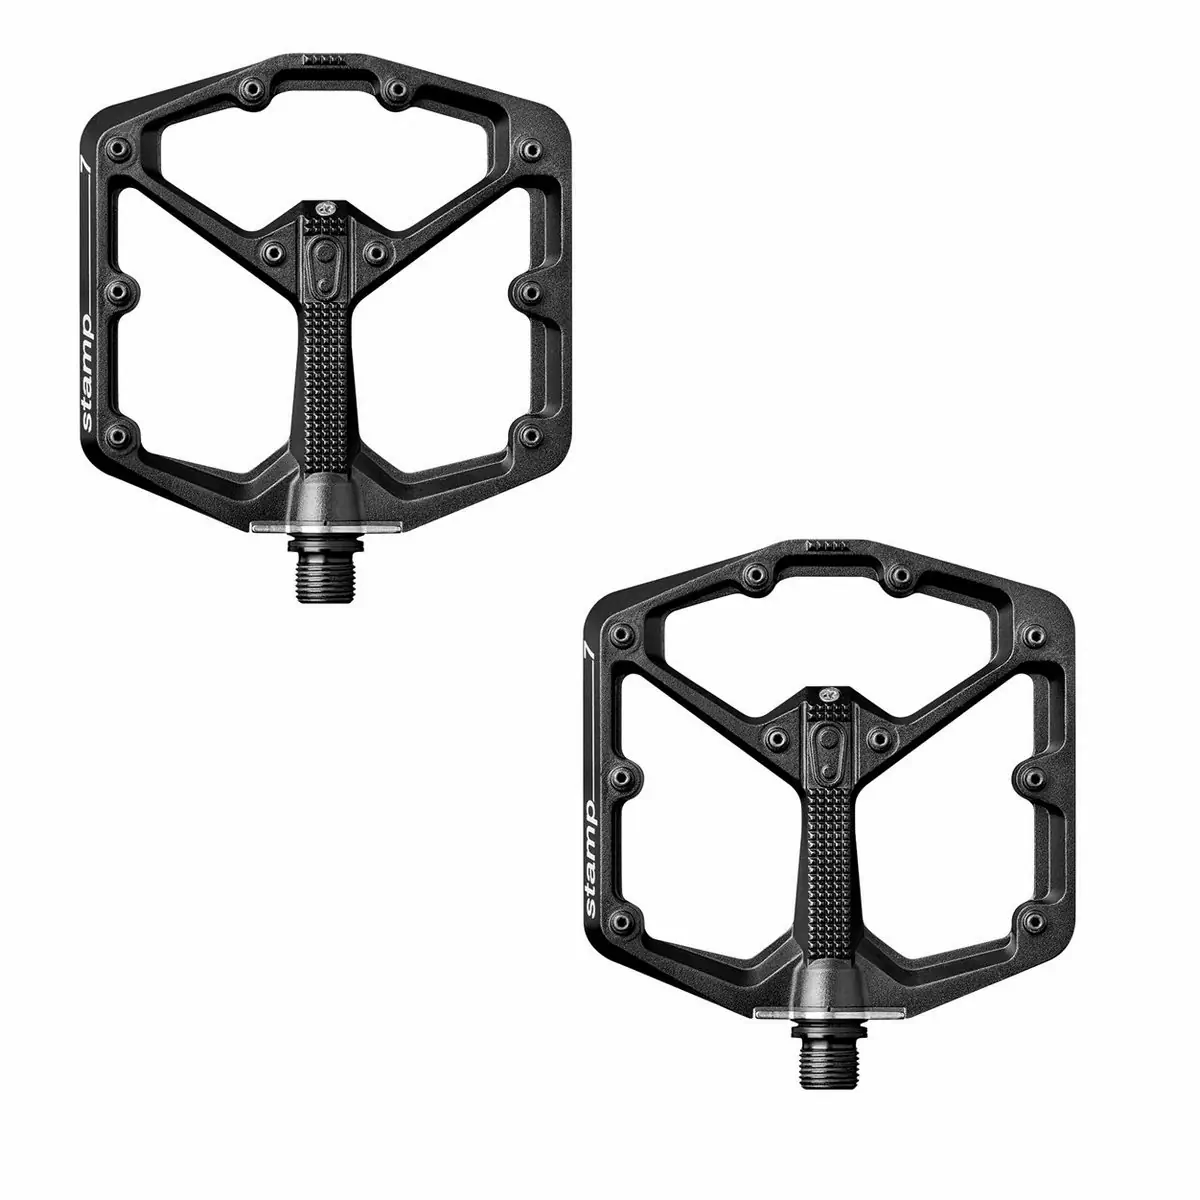 Pair of pedals Stamp 7 Large black - image